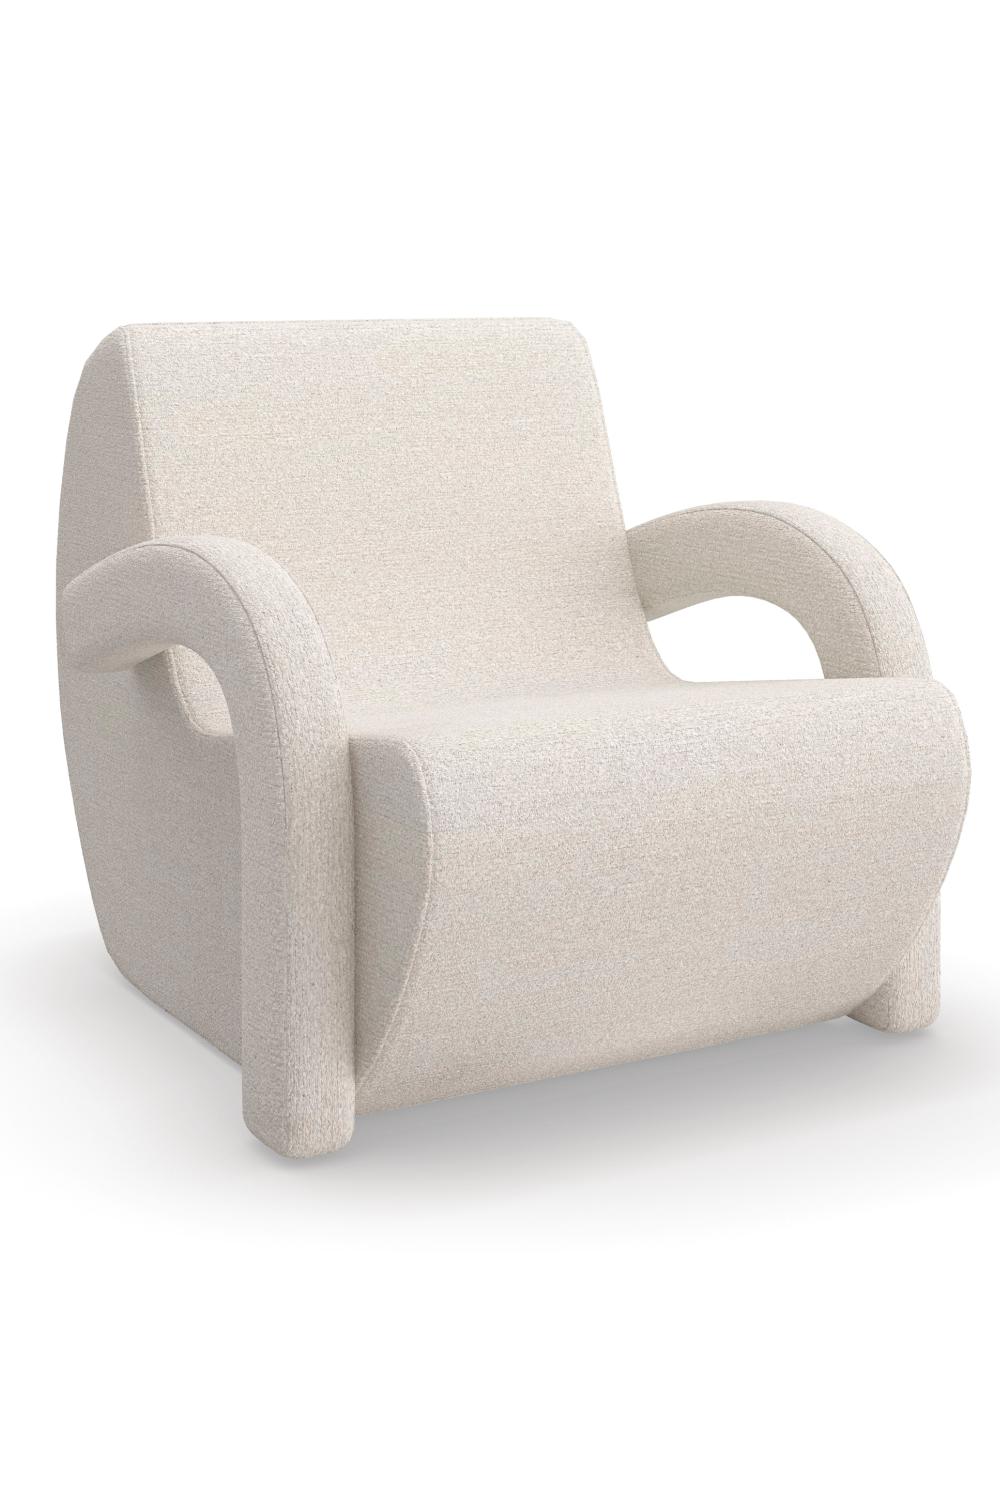 White Bouclé Arched Accent Chair | Andrew Martin Leo | Oroa.com